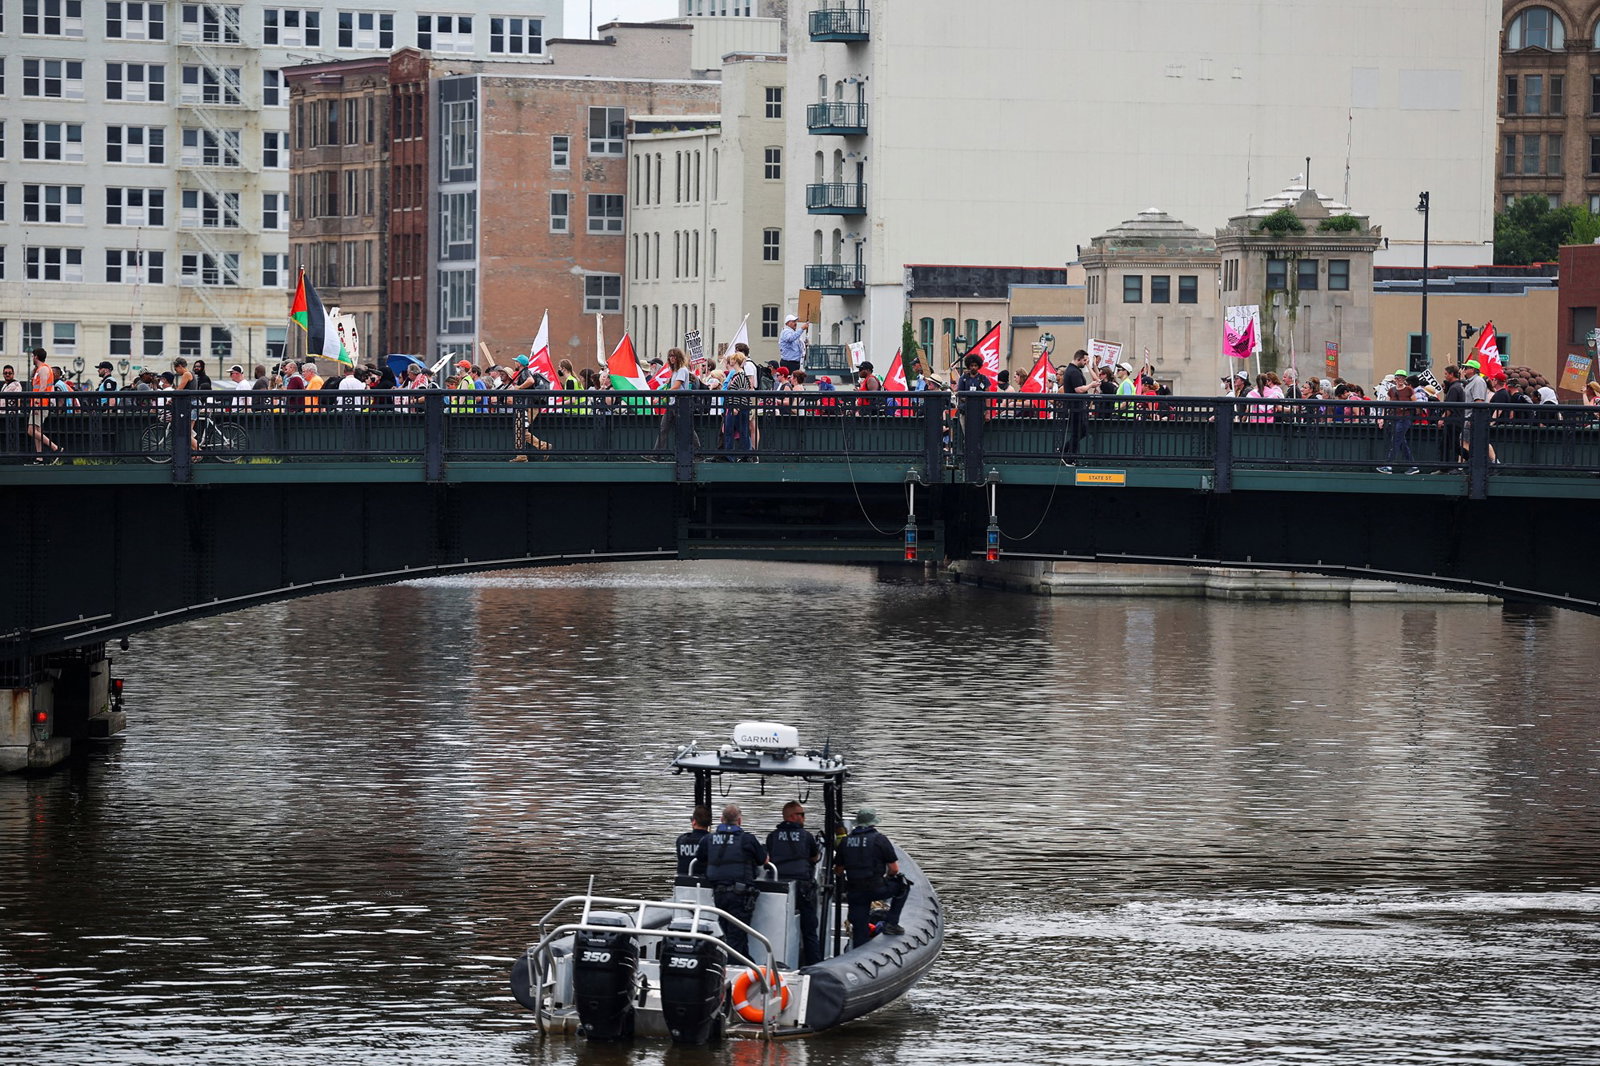 A group of protesters carrying signs and Palestinian flags walks across a bridge